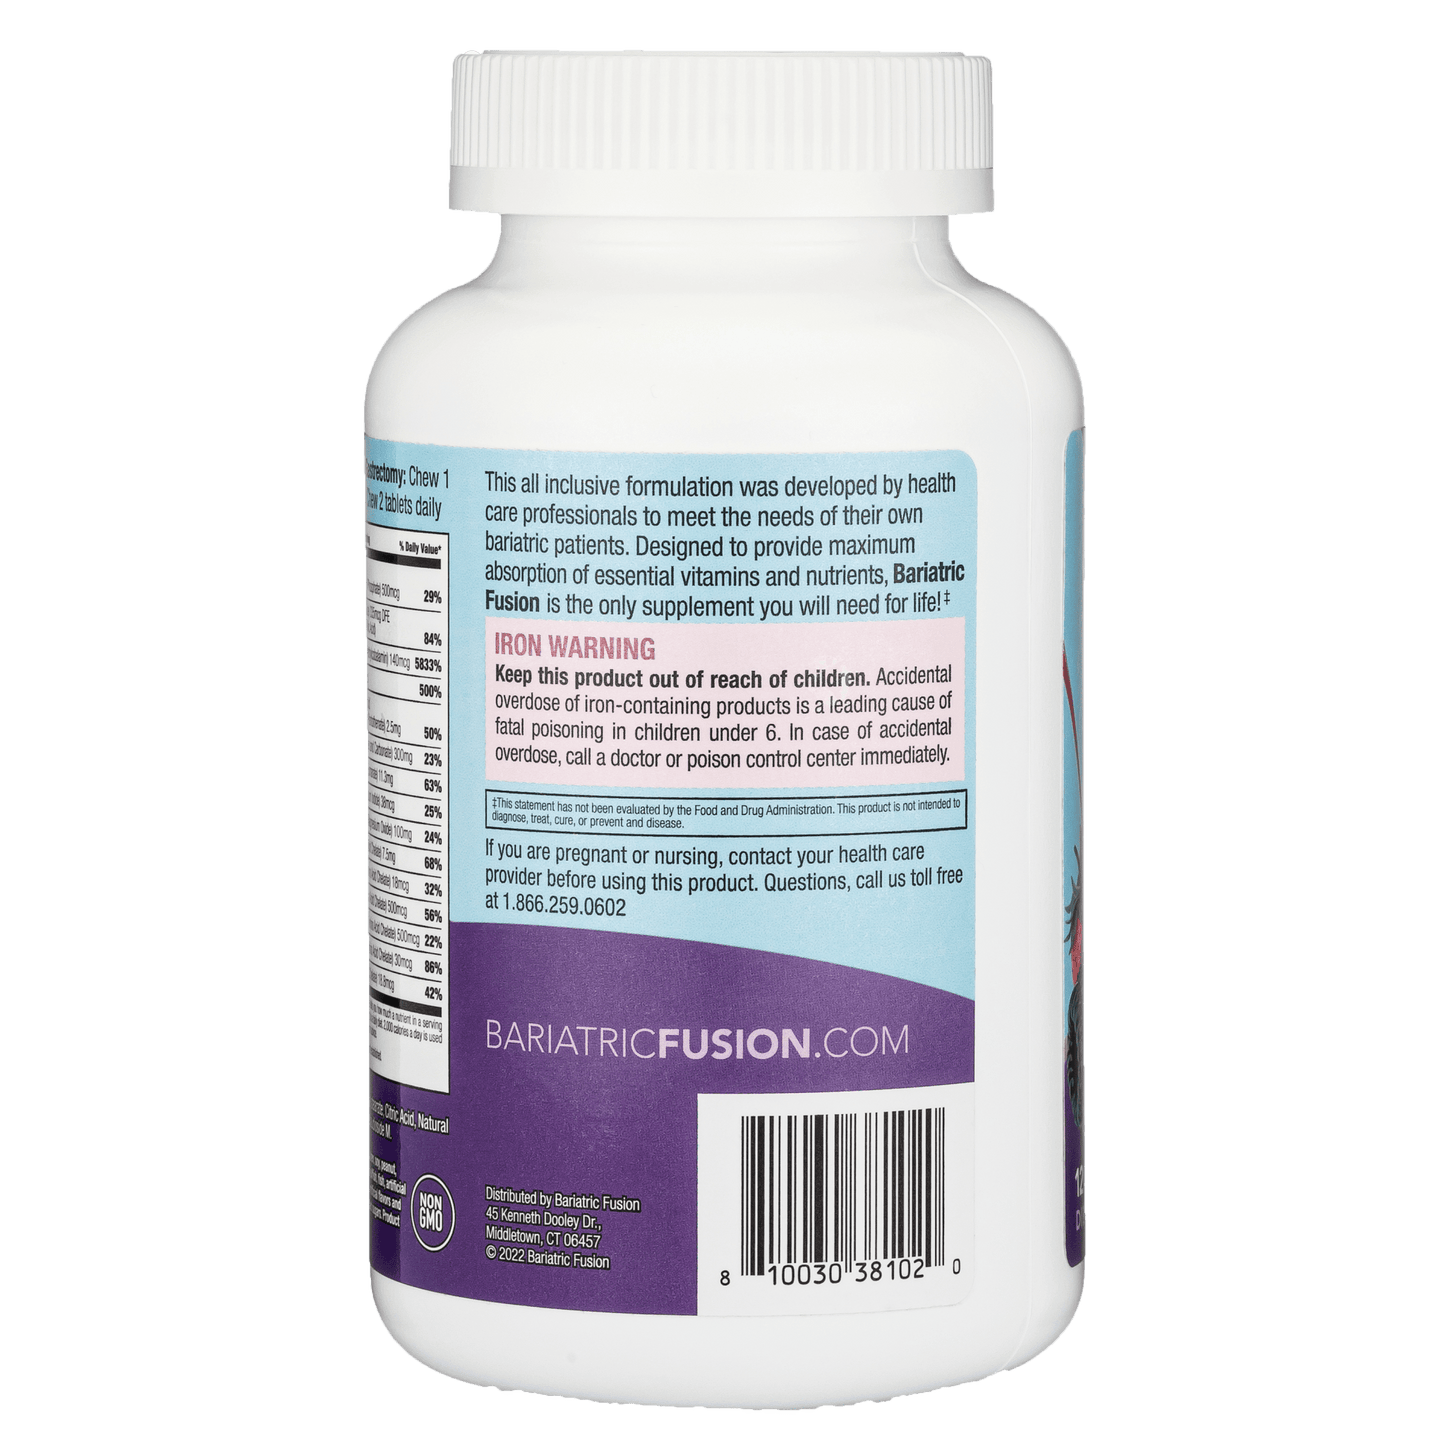 Very Berry Complete Chewable Multivitamin with Vitamin K - Bariatric Fusion